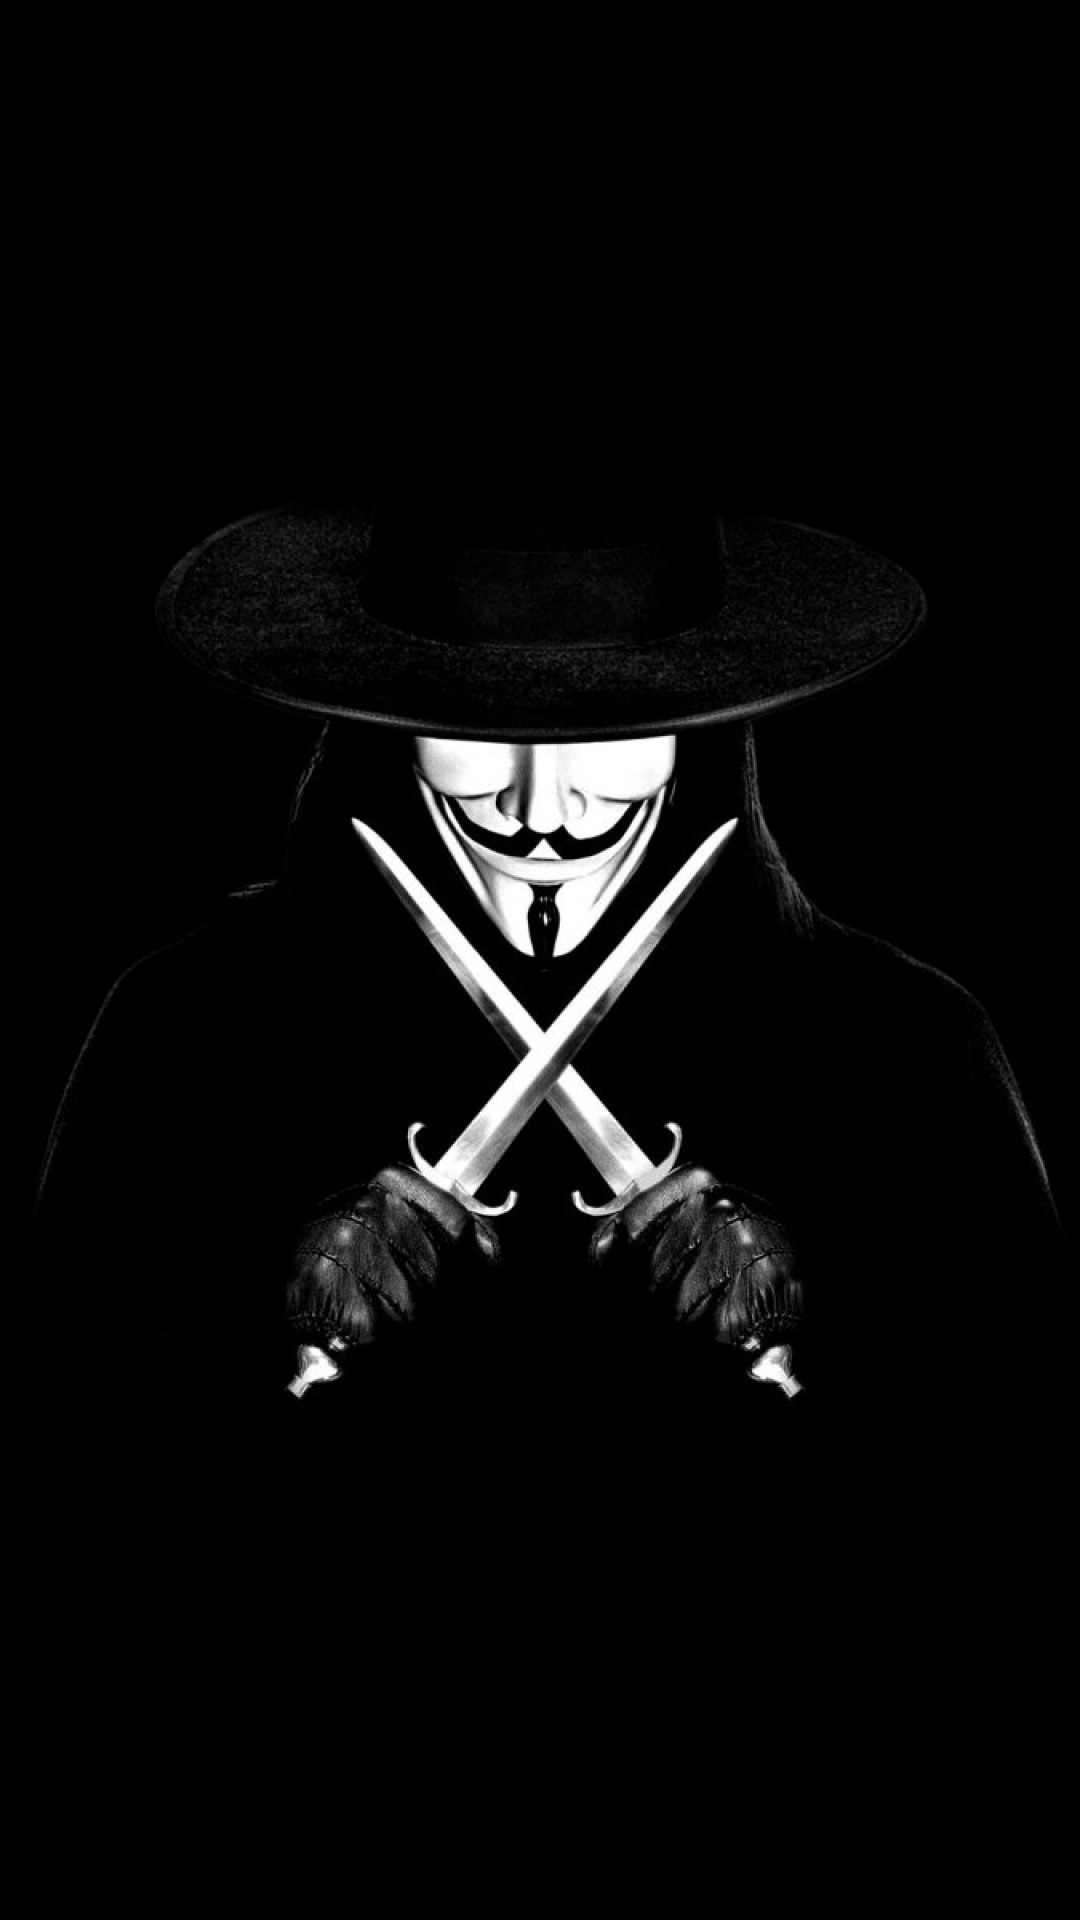 Guy Fawkes Mask: Was originally designed by David Lloyd for the comic book series "V for Vendetta". 1080x1920 Full HD Background.